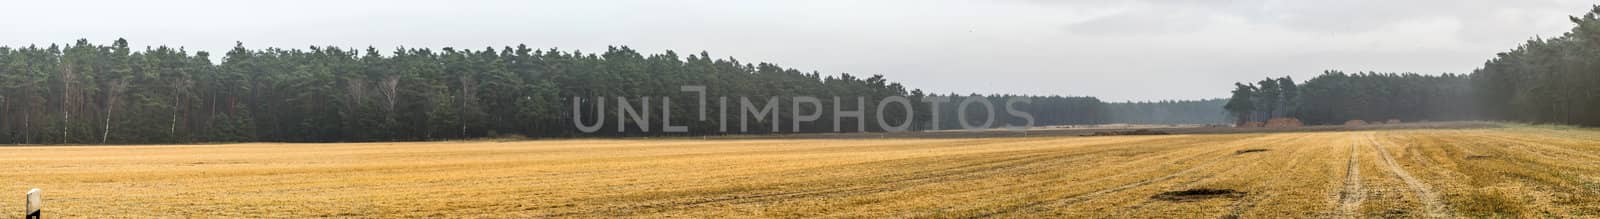 Panorama of a harvested arable land in front of a strip with dense forest stand, with a lot of free space for text, as header for a website, stitched